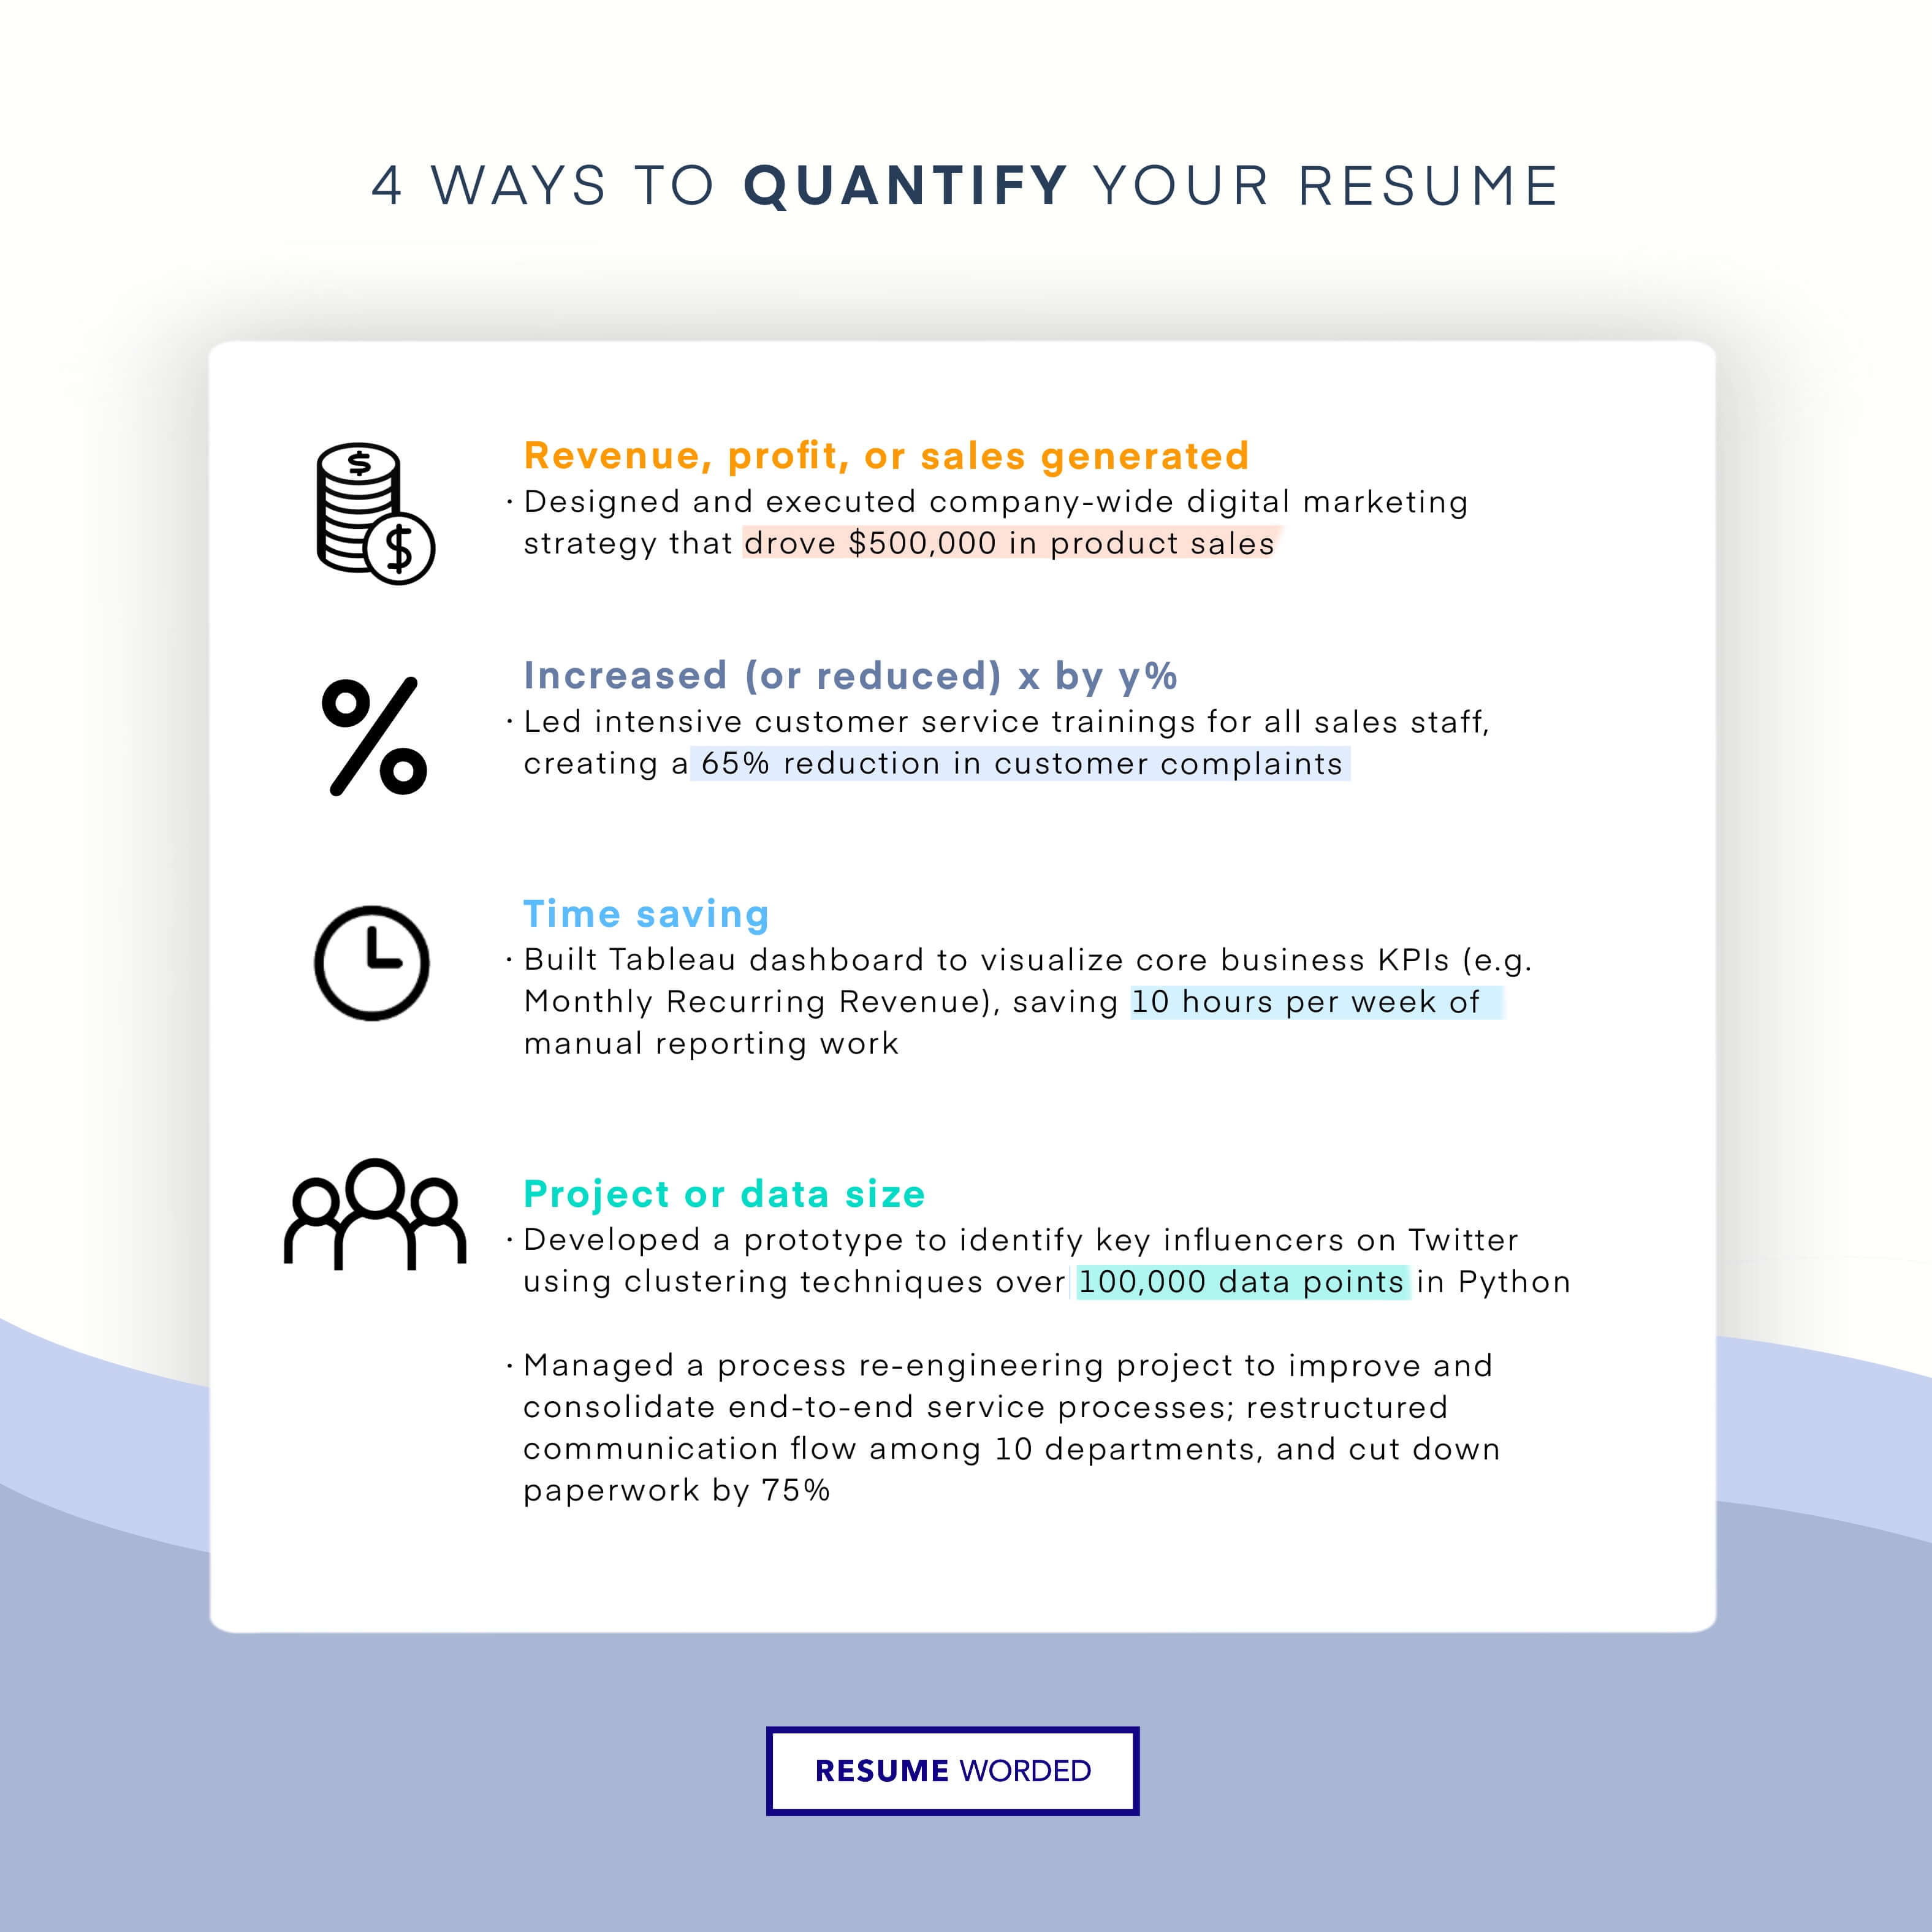 How to quantify your resume, with examples